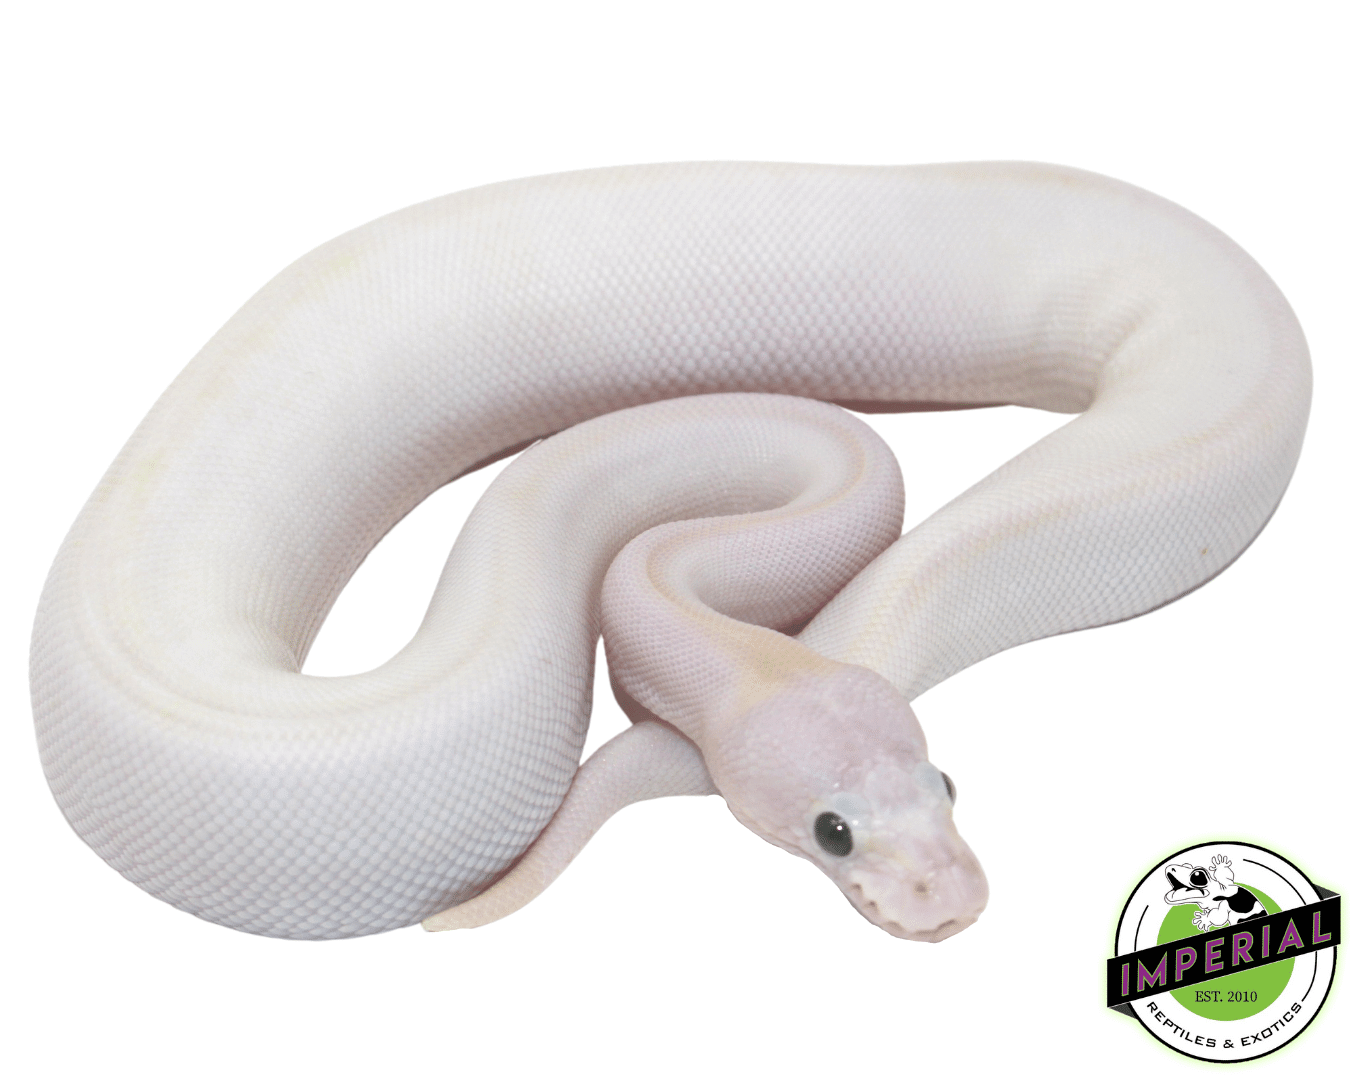 pastel ivory ball python for sale online, buy cheap ball pythons near me